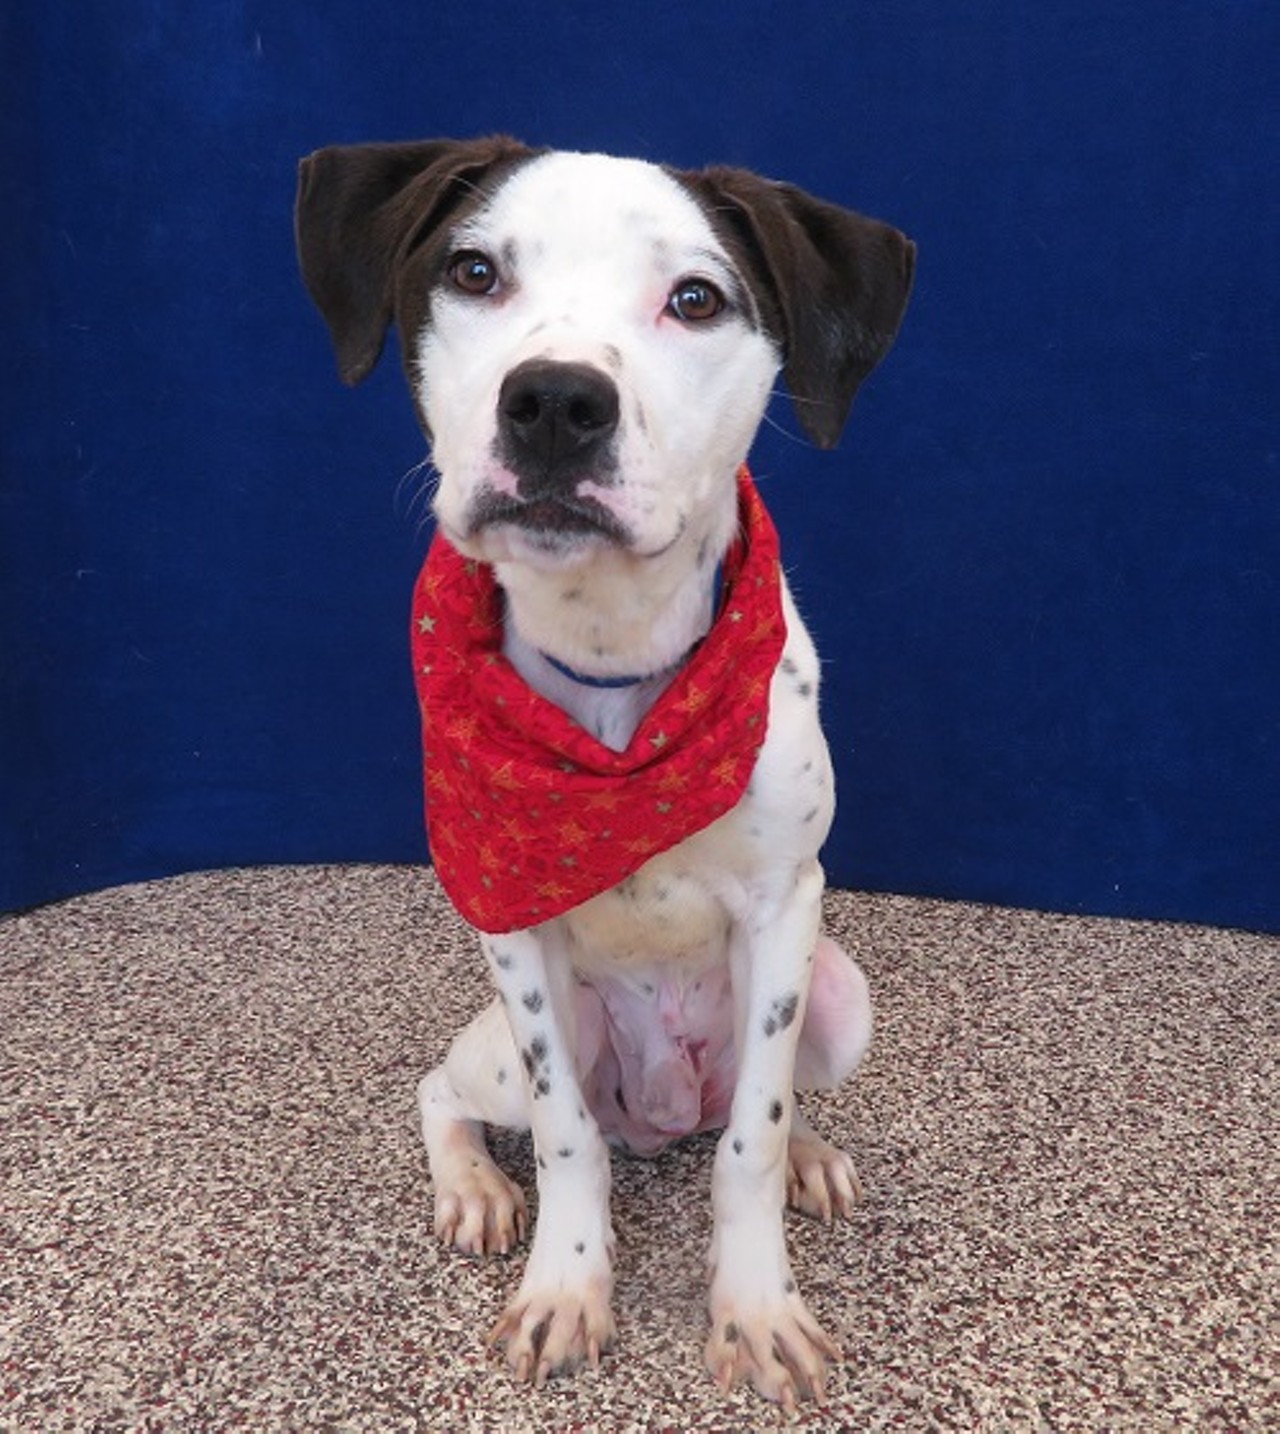 NAME: Tucker
GENDER: Male
BREED: Pit Bull Terrier
AGE: 3 years
WEIGHT: 31 pounds
SPECIAL CONSIDERATIONS: May be deaf
REASON I CAME TO MHS: Rescued in Detroit
LOCATION: Mackey Center for Animal Care in Detroit
ID NUMBER: 865032